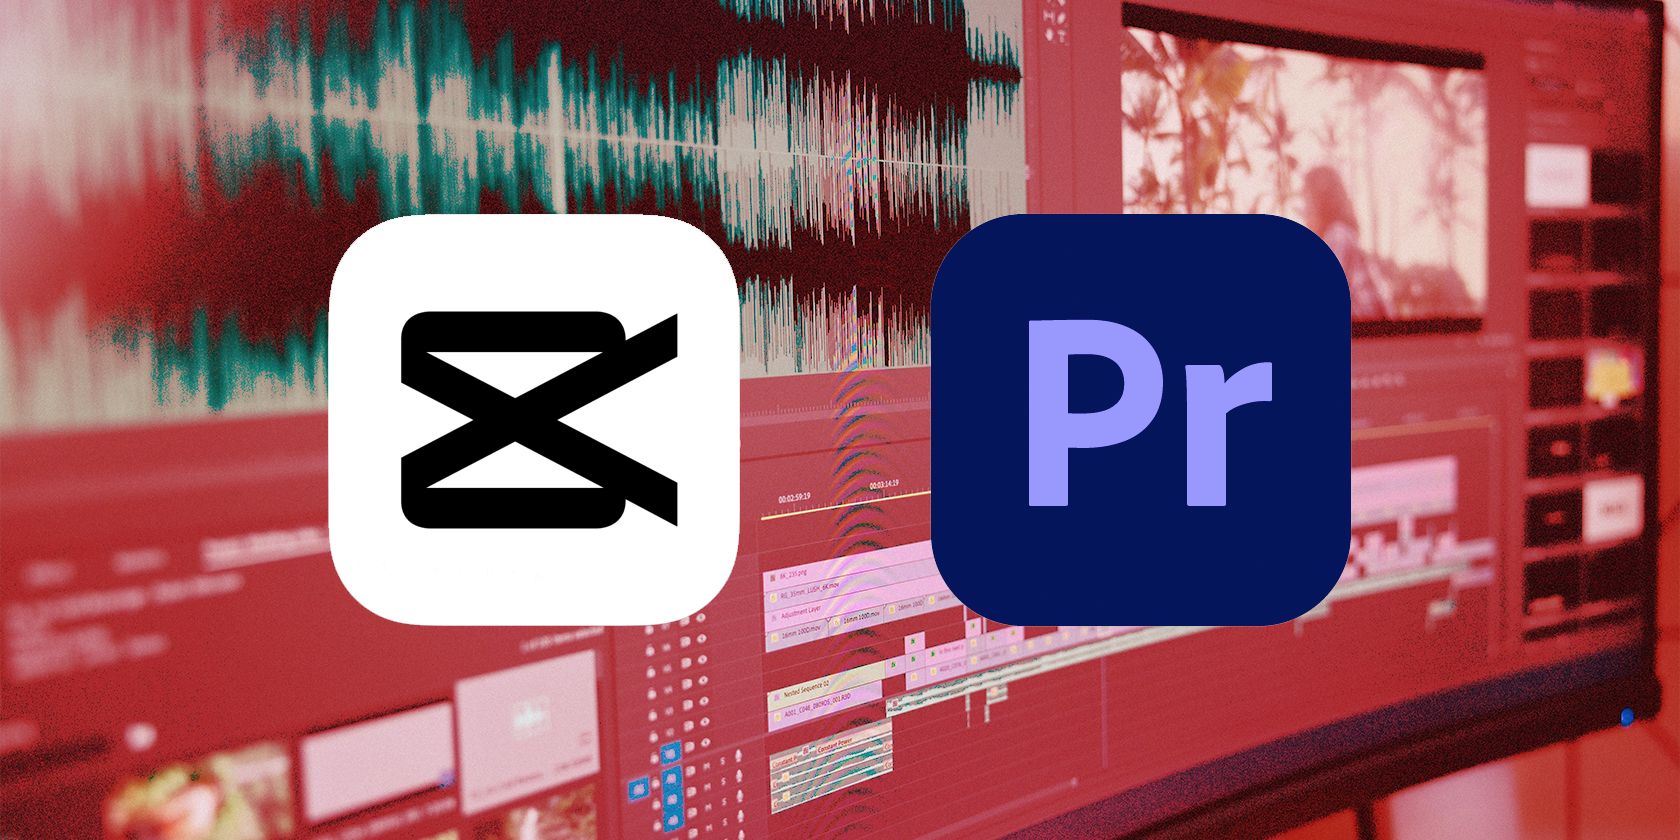 CapCut vs. Adobe Premiere Pro: Which Is Better for Video Editing?